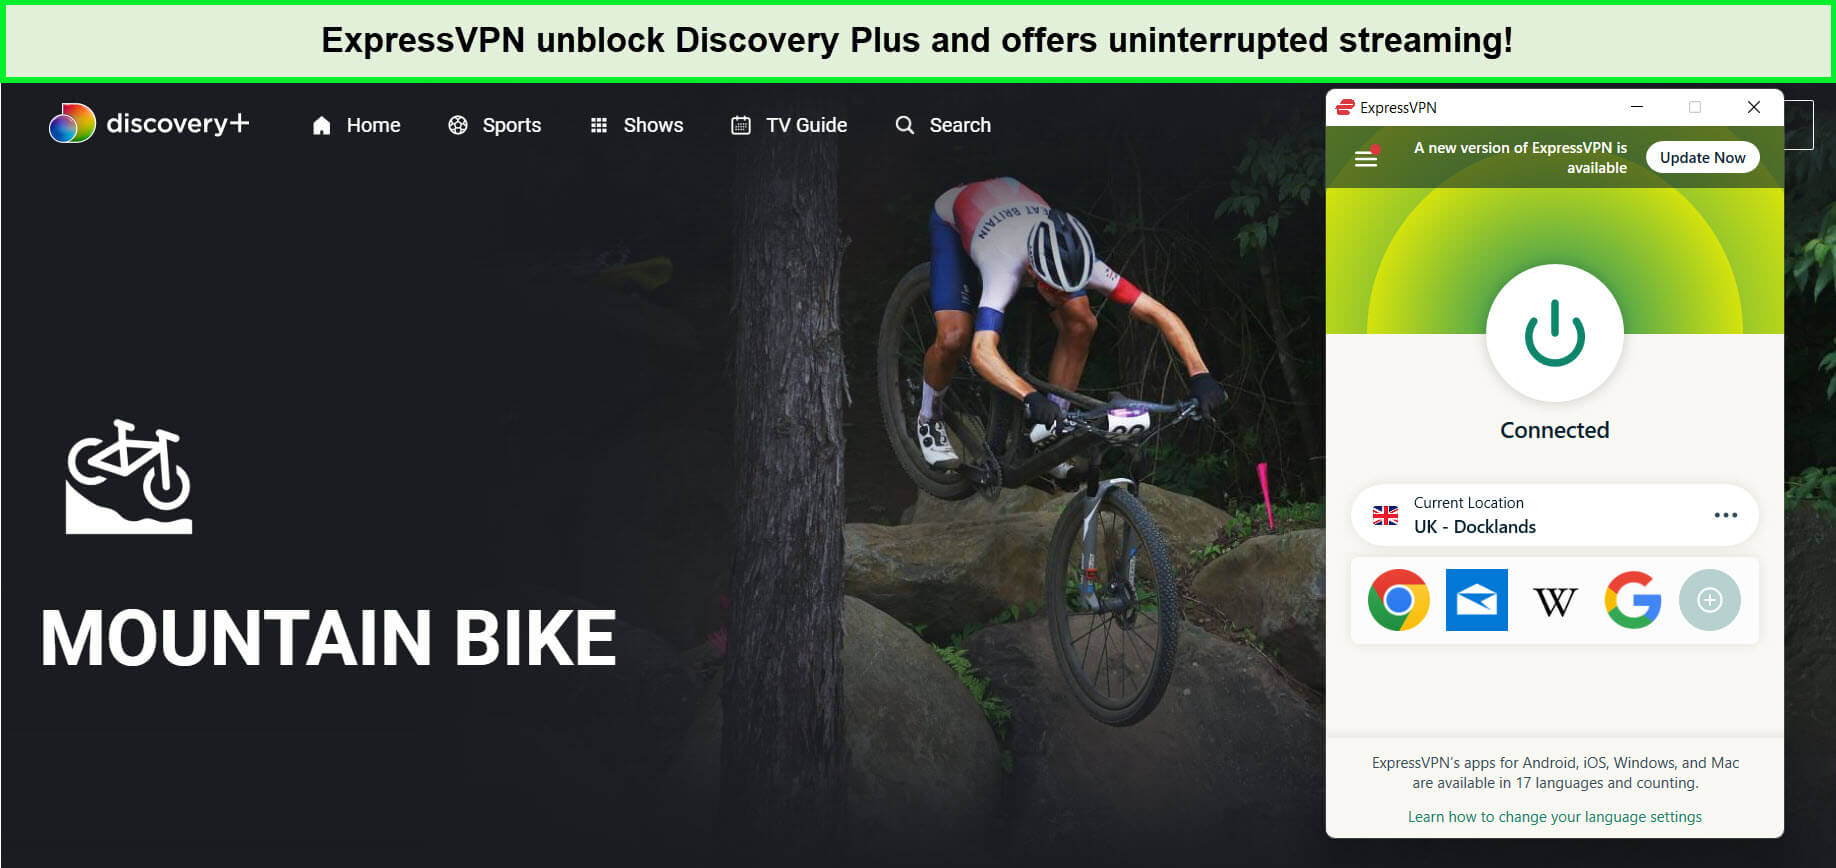 expressvpn-unblocks-uci-mountain-bike-world-series-in-Italy-on-discovery-plus